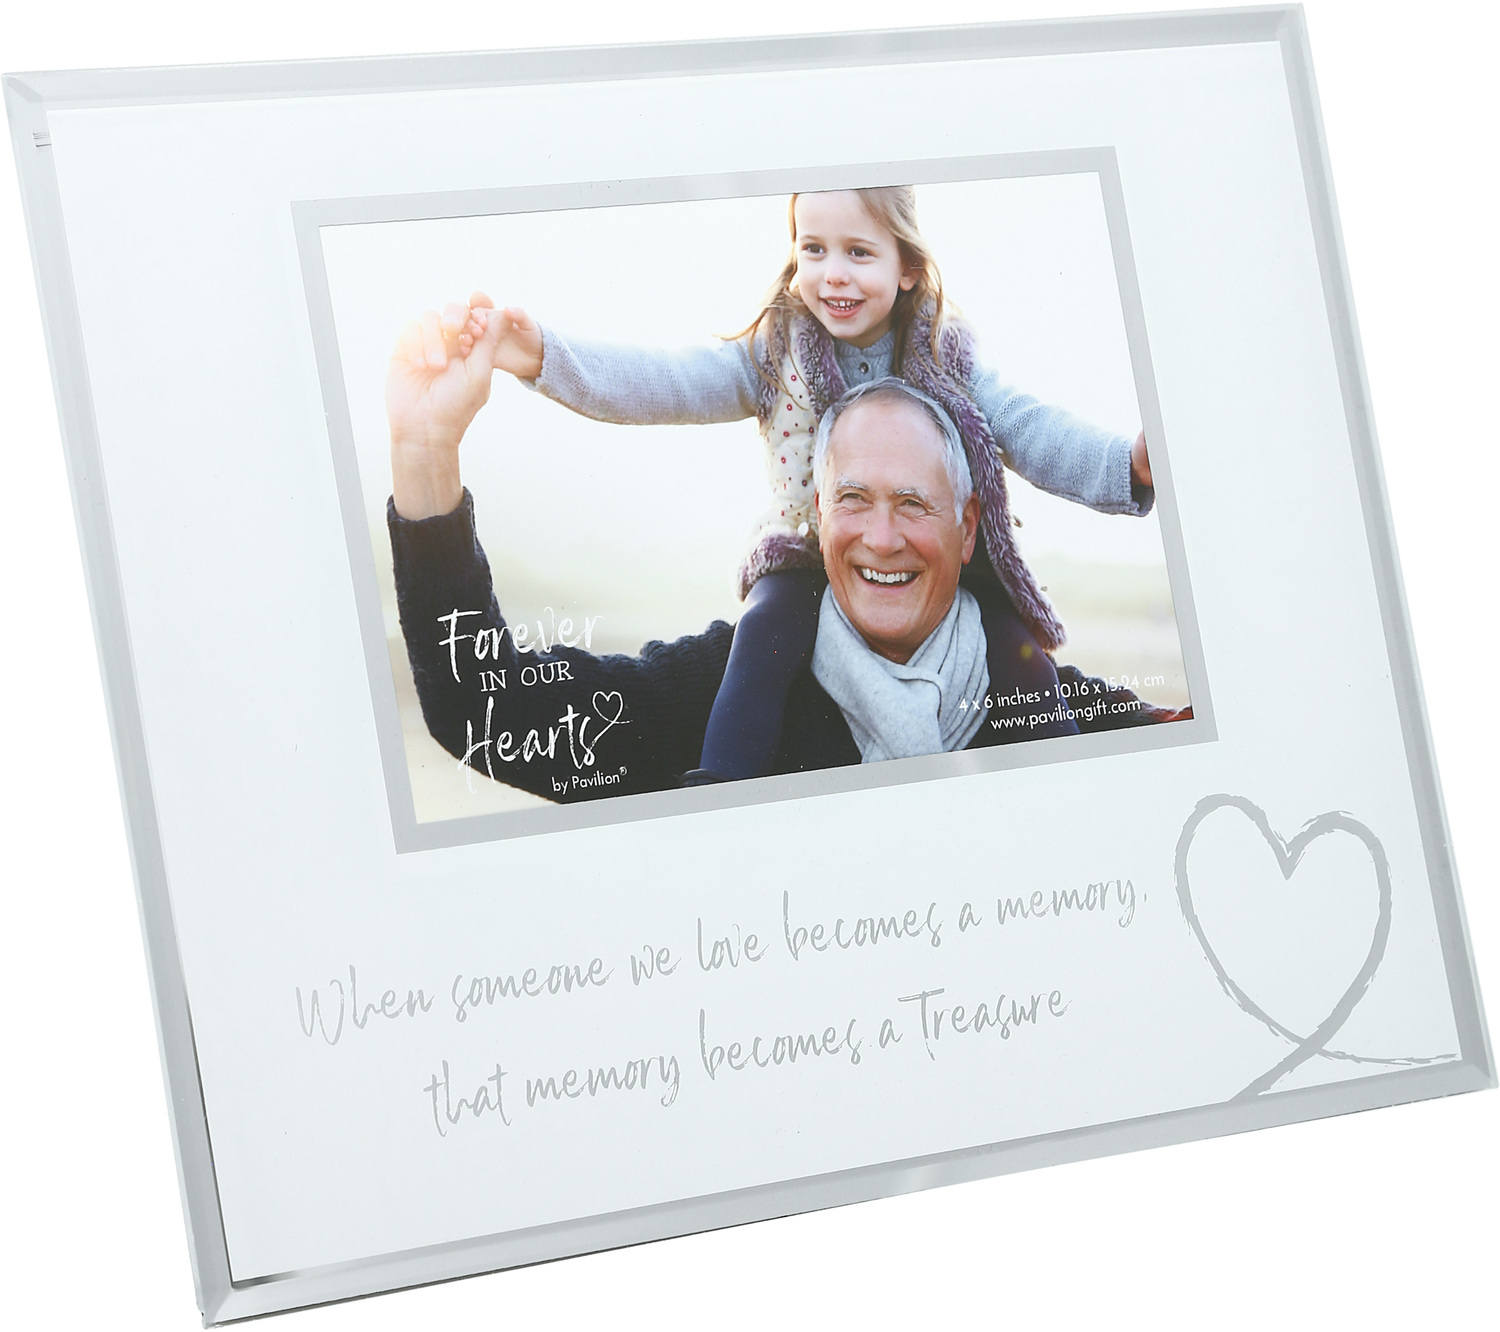 Treasured Memory by Forever in our Hearts - Treasured Memory - 9.25" x 7.25" Frame
(Holds 6" x 4" Photo)